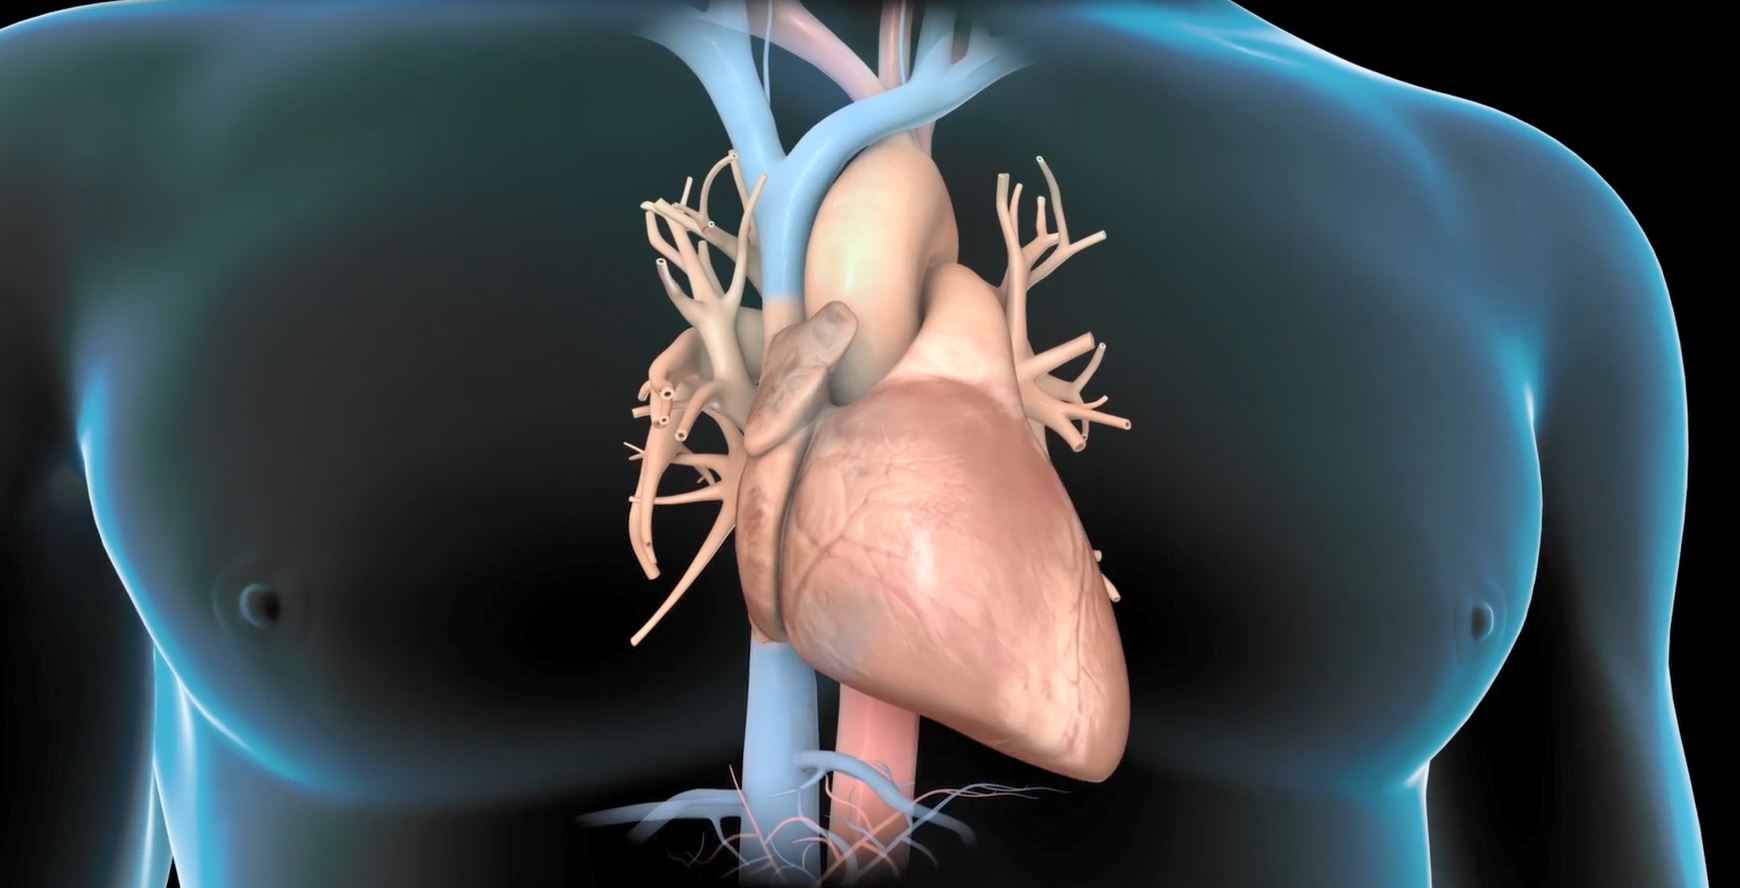 New research could help repair damaged hearts